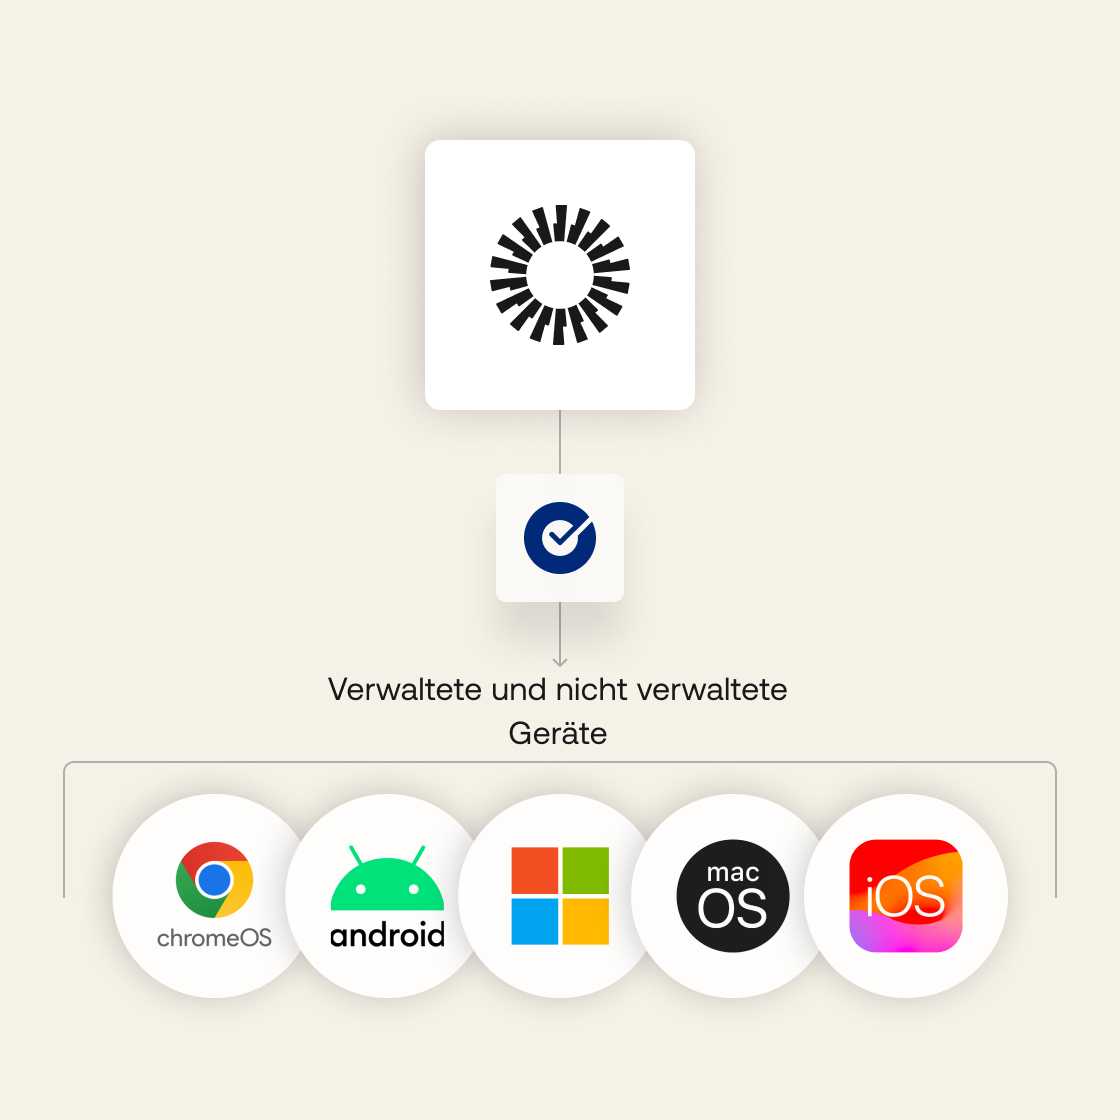 Image of Okta icon pointing towards and SSO icon, leading to various managed and unmanaged devices.